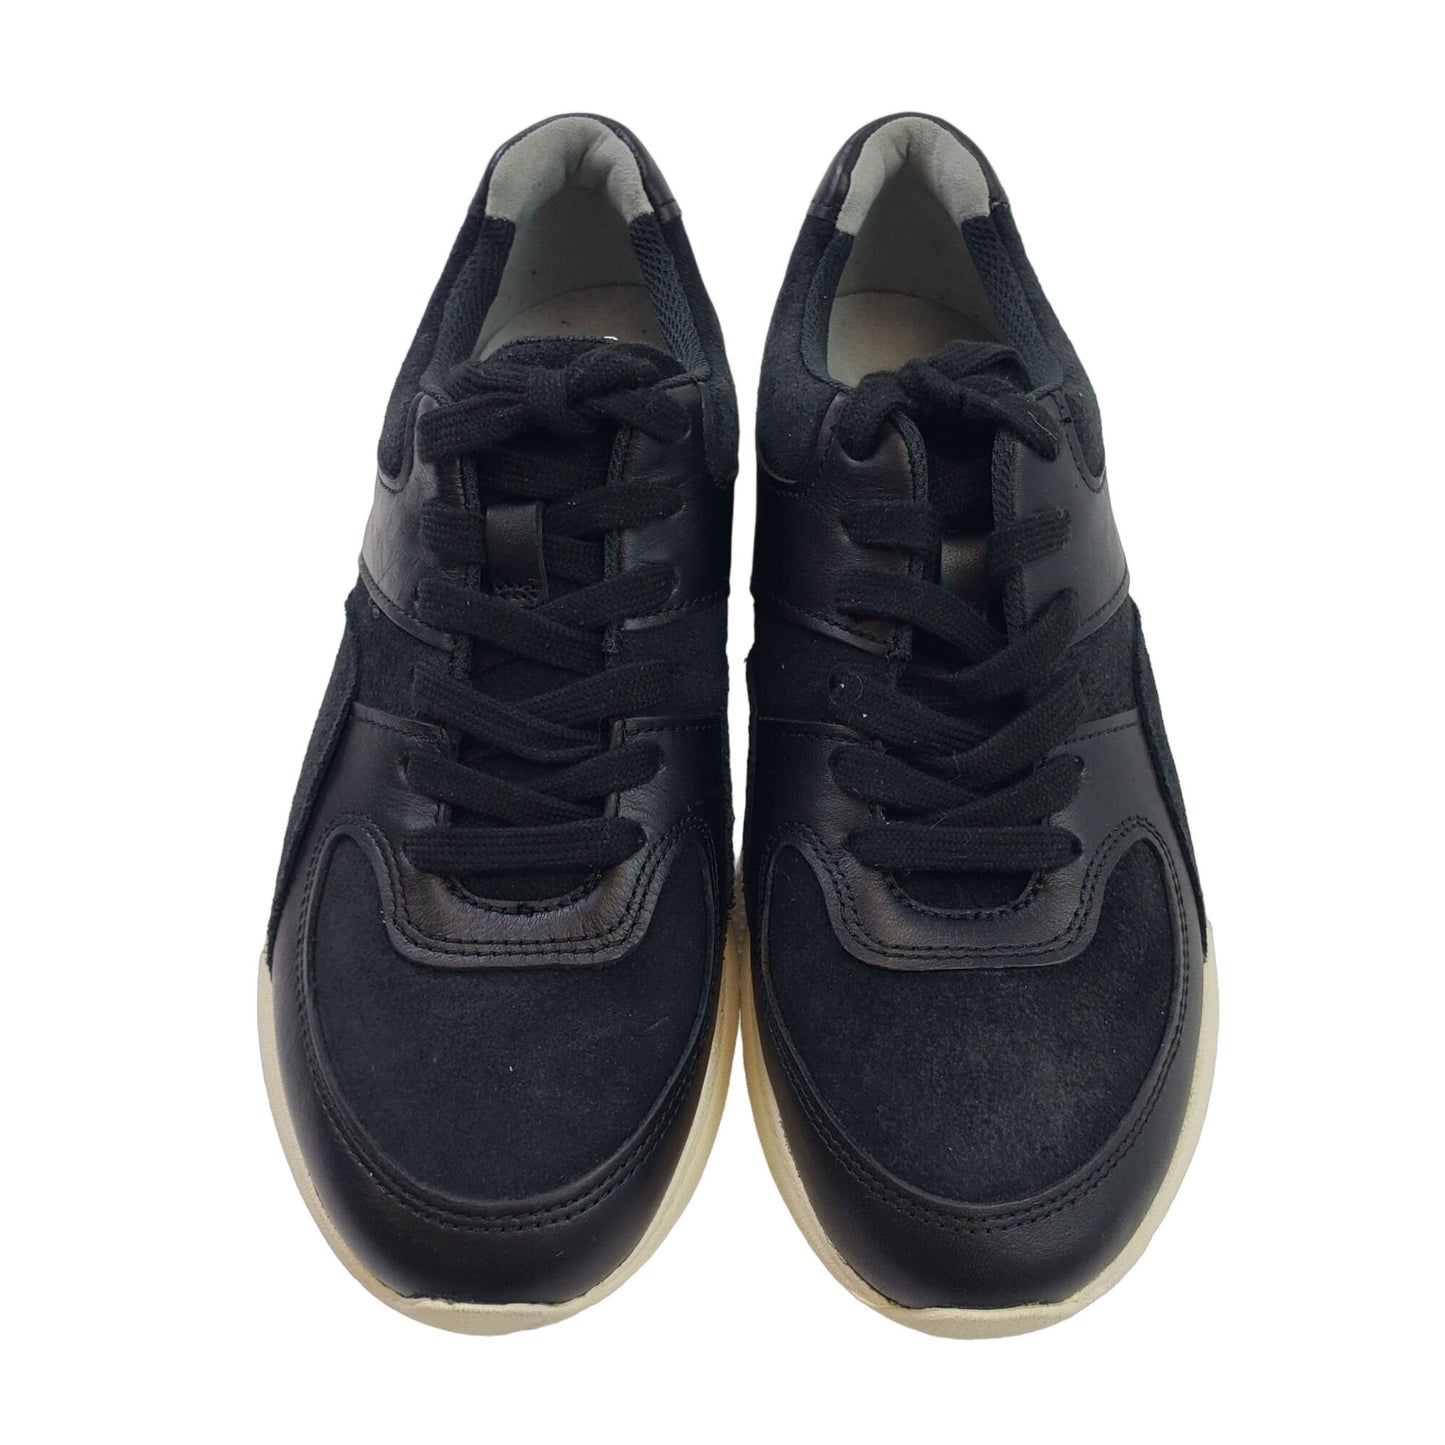 NWOB Everlane O by Everlane The Trainer Leather Sneakers Size 7 Women's/5 Men's